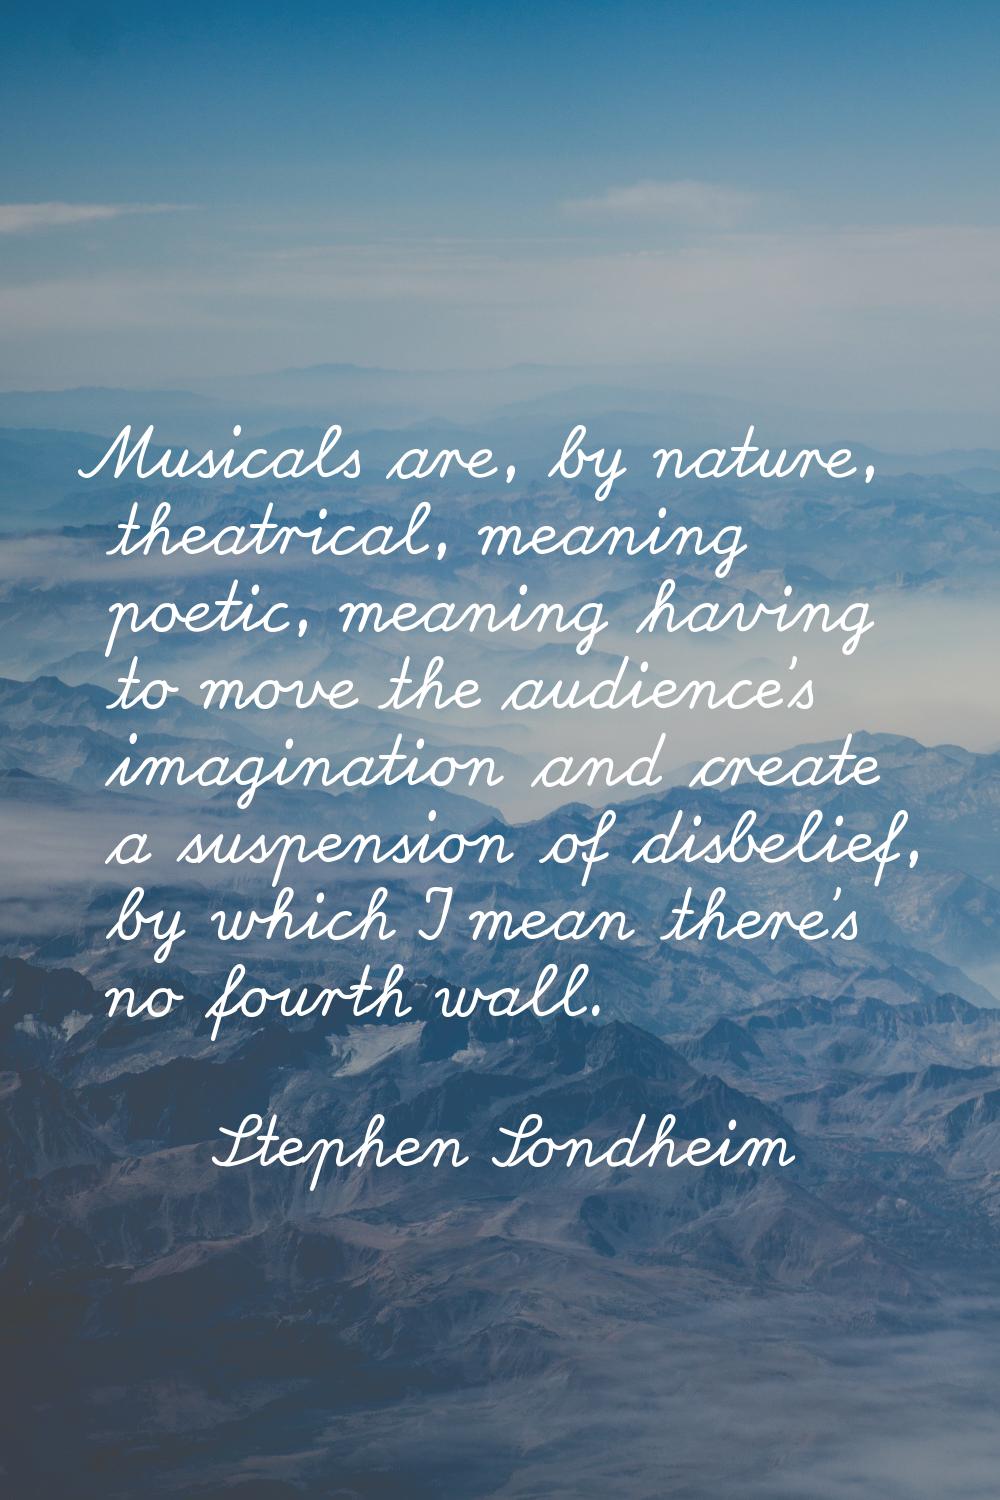 Musicals are, by nature, theatrical, meaning poetic, meaning having to move the audience's imaginat